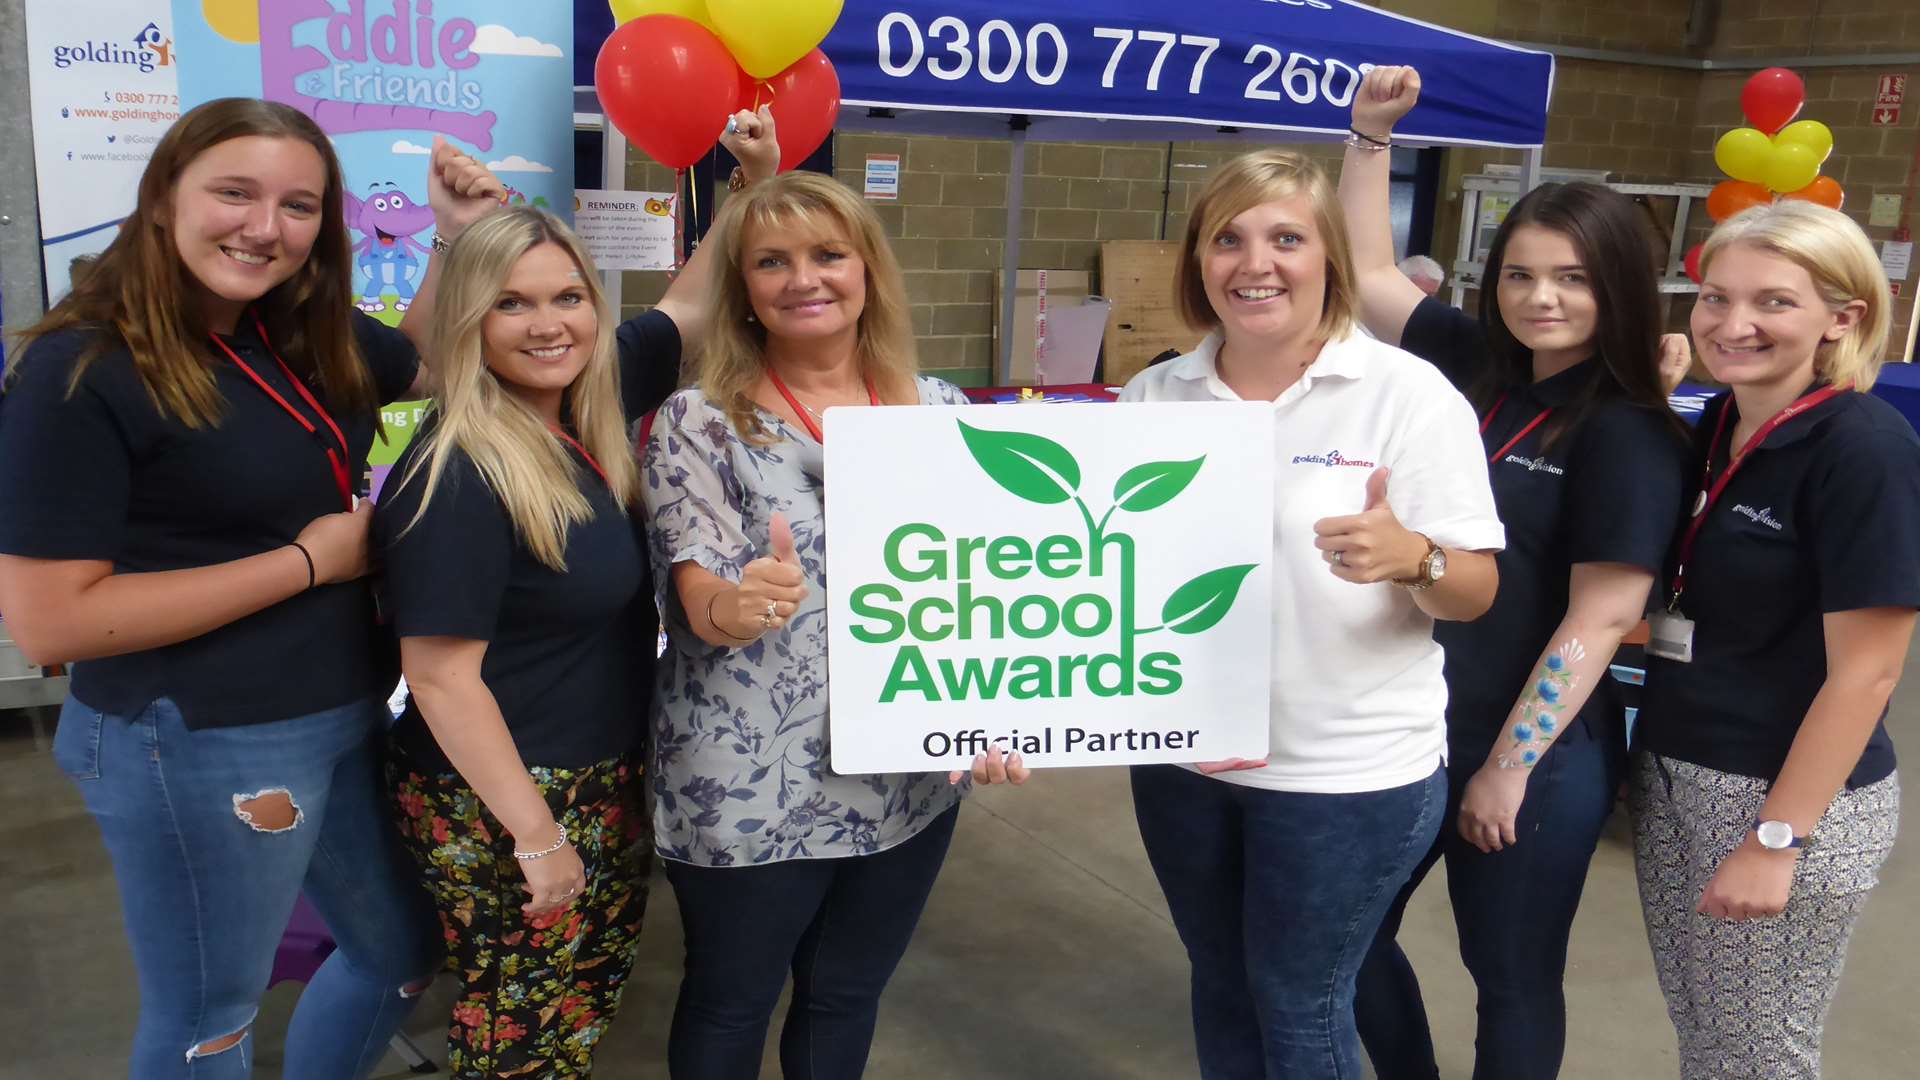 Caroline McBride and staff from Golding Homes officially launch the Green School Awards which are now open for nominations.